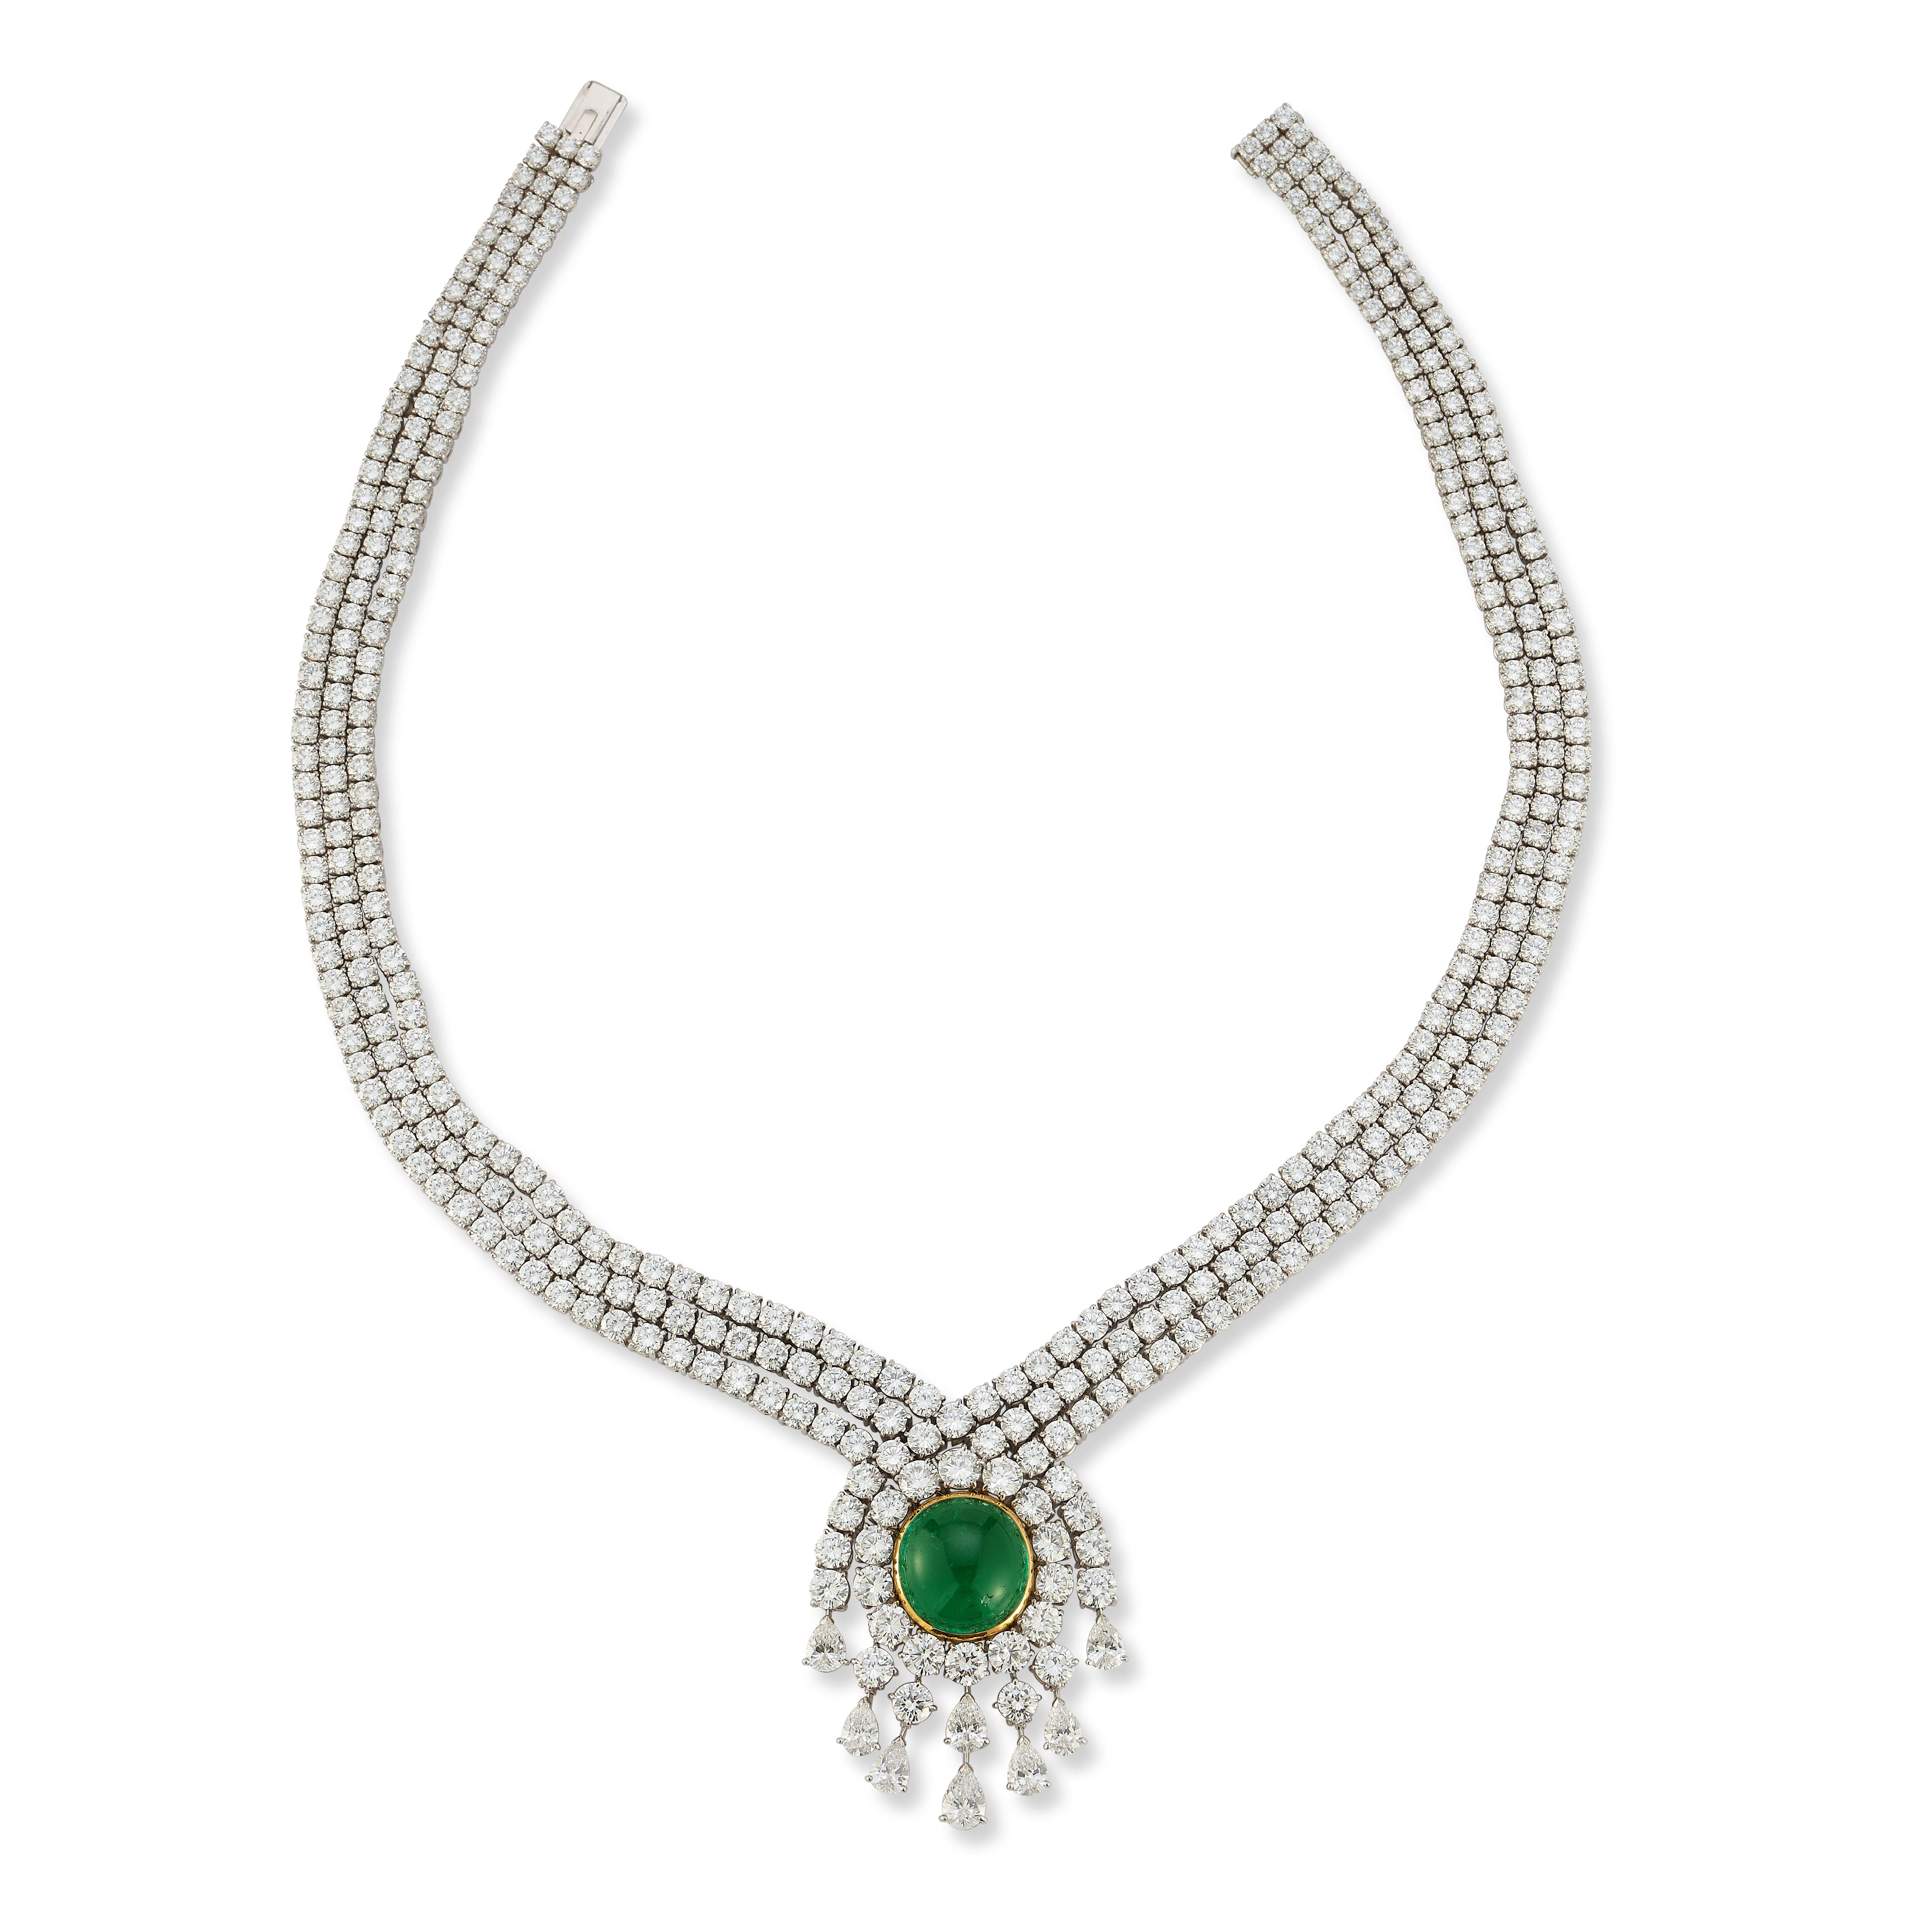 Van Cleef & Arpels Diamond & Emerald Necklace 

A platinum necklace set with 382 round cut diamonds, 8 pear shaped diamonds, and a Columbian cabochon emerald

Diamond Information
Approximate Total Weight: 65.0 carats
Approximate Color Grade: F to